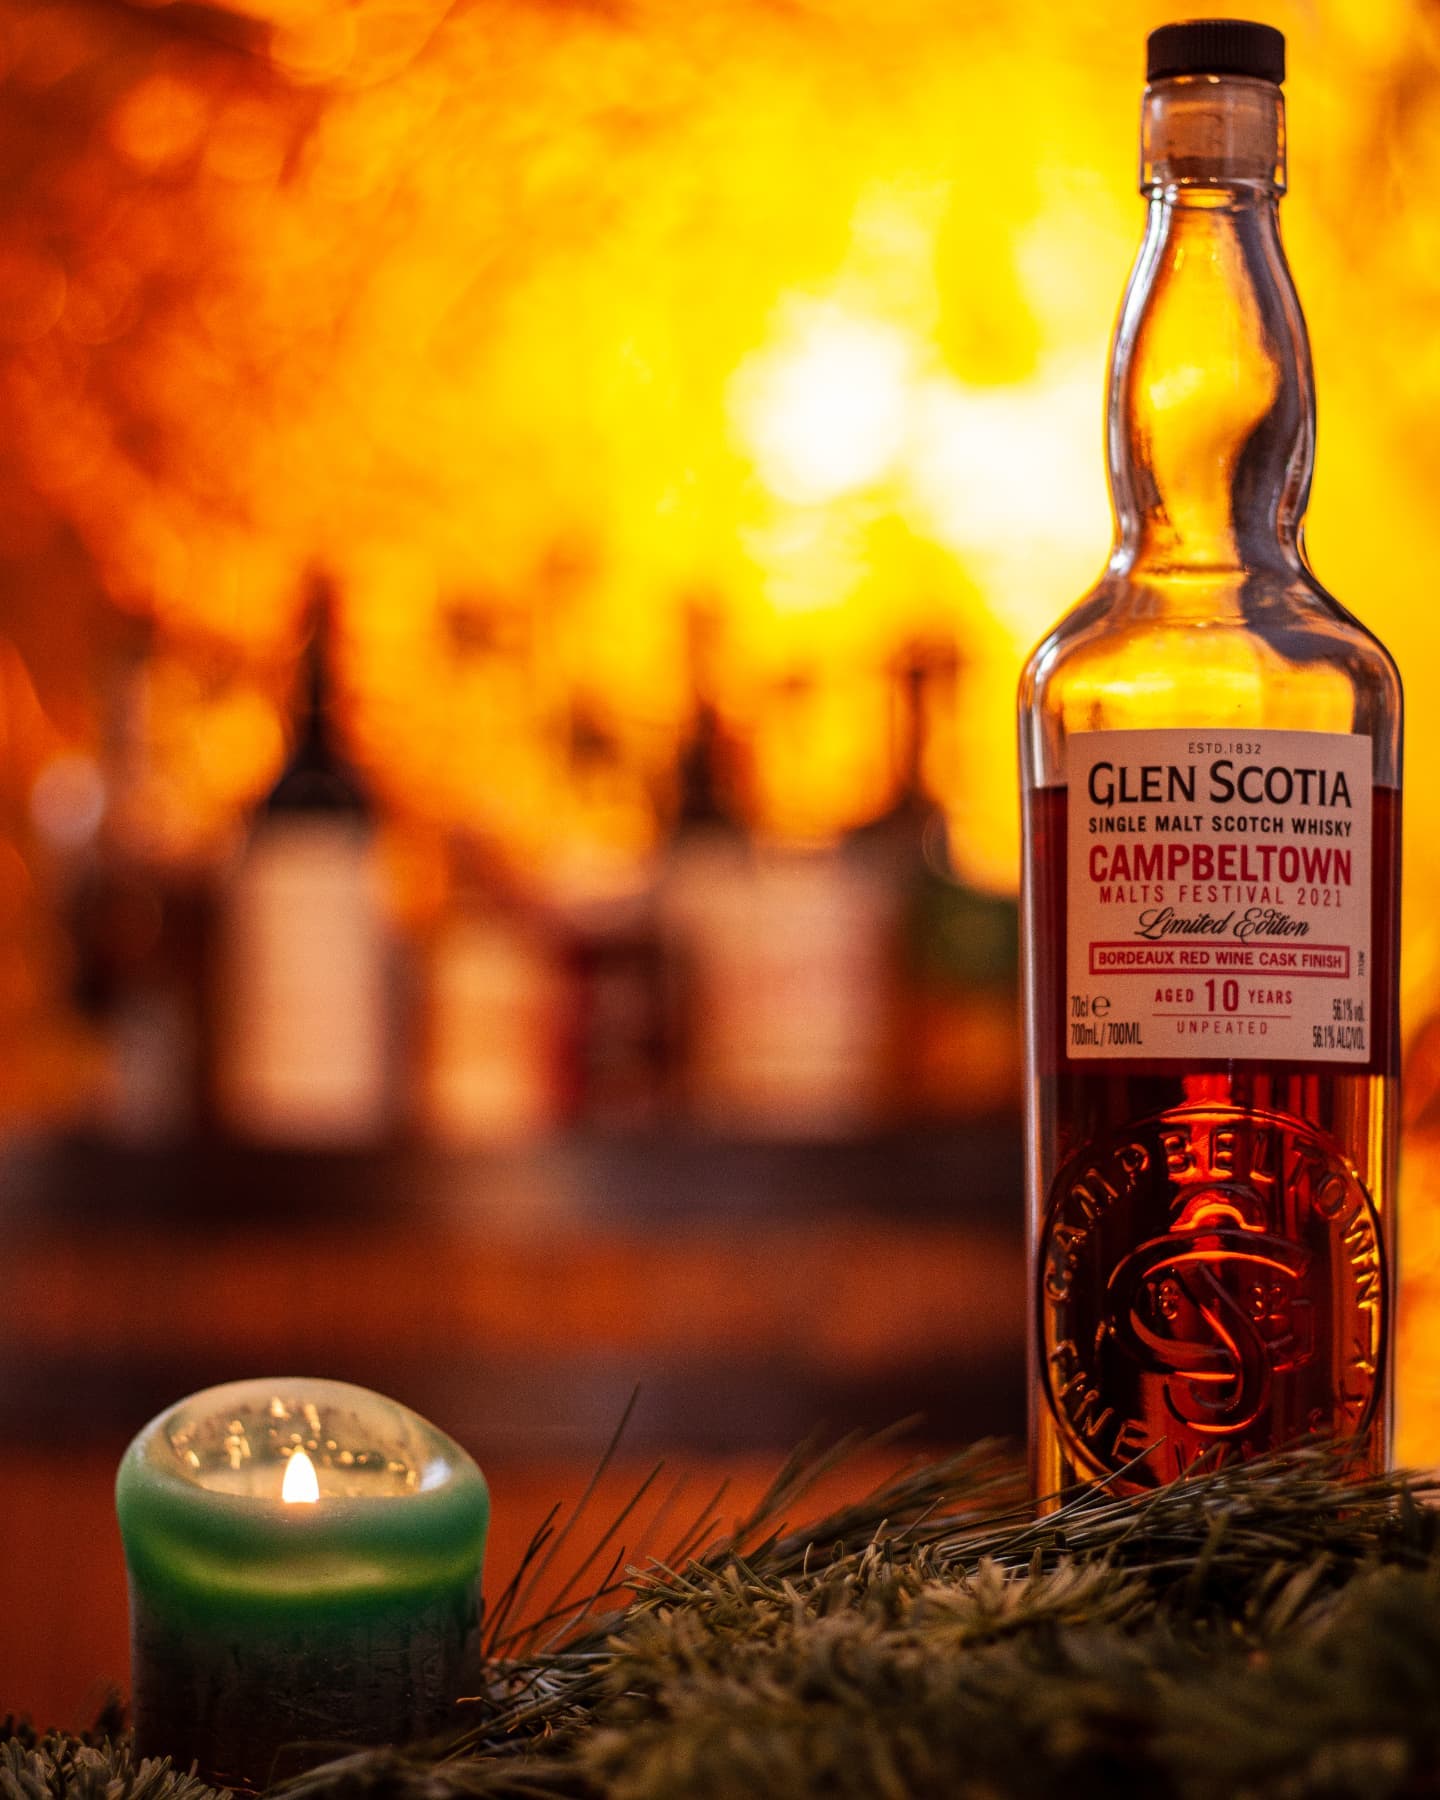 #mcwulf advent calendar 2021 - window no.18

[unpaid ad]

And another one for tonight: window 18 is the @glenscotiamalts Campbeltown Malts Festival bottling 2021, 10 years old and finished in Bordeaux red wine casks (56.1% ABV)😍

📜 tasting notes:

👃
Red berries, pepper berries, white strawberries, honey, wood chips, rice paper, peeled almonds, wet grass, vanilla, creme brulee.

👅
 Spicy and prickly on the tounge, old English marmelade, quite some bitterness as with hops, caramelised sugar, hazelnut chocolate, earthy smoke, and some special perfumed blackcurrant aromas.

🏁
Dry, long and warming, old furniture, oak wood, candied orange peel, some more earthy smoke and red berries, spruce resin, aromatic as with proper honeydew honey.

More info to be found here: www.mcwulf.de (in German).

Rhetoric question for you out there: how do you like limited festival bottlings at cask strength, red wine finished and at super affordable prices??😉 I know, this one seems almost too good to be true, but it is true! And it's a Campbeltown whisky that was actually available during the last half year - unbelievable, isn't it? (Can you tell I'm quite annoyed by the unavailability of other Campbeltown whiskies...?!)

Let me know your thoughts about this one and never forget to enjoy your dramming - cheers!🕯️🥃🎄

#whisky #whiskey #campbeltown #scottishwhisky #scotch #slainte #singlemalt #campbeltownwhisky #whiskylover #whiskygram #instawhisky #instadram #glenscotia #whiskylovers #campbeltownmaltsfestival #tastingnotes #dramoftheday #bordeaux #frenchredwine #dramantics #dramtastic #picoftheday #pictureoftheday #whiskywednesday #mullofkintyre #limited #kintyre #whiskyadvent #hofsaale